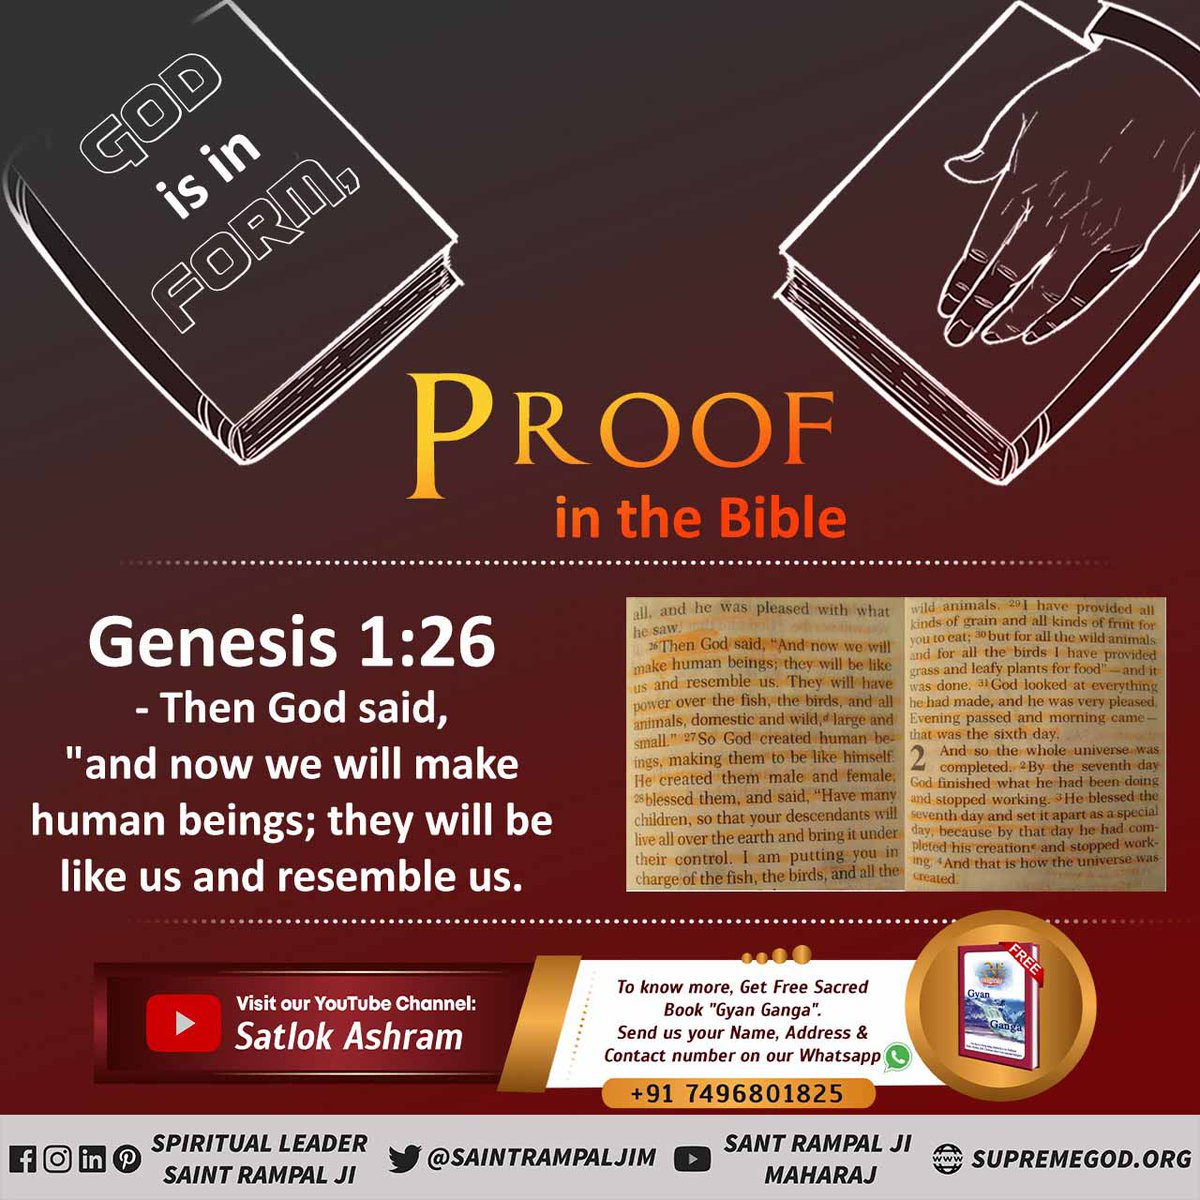 #GodMorningWednesday #ईसाई_नहीं_समझे_HolyBible PROOF in the Bible Genesis 1:26-Then God said, 'and now we will make human beings;they will be like us and resemble us. Visit our YouTube channel:Satlok Ashram.